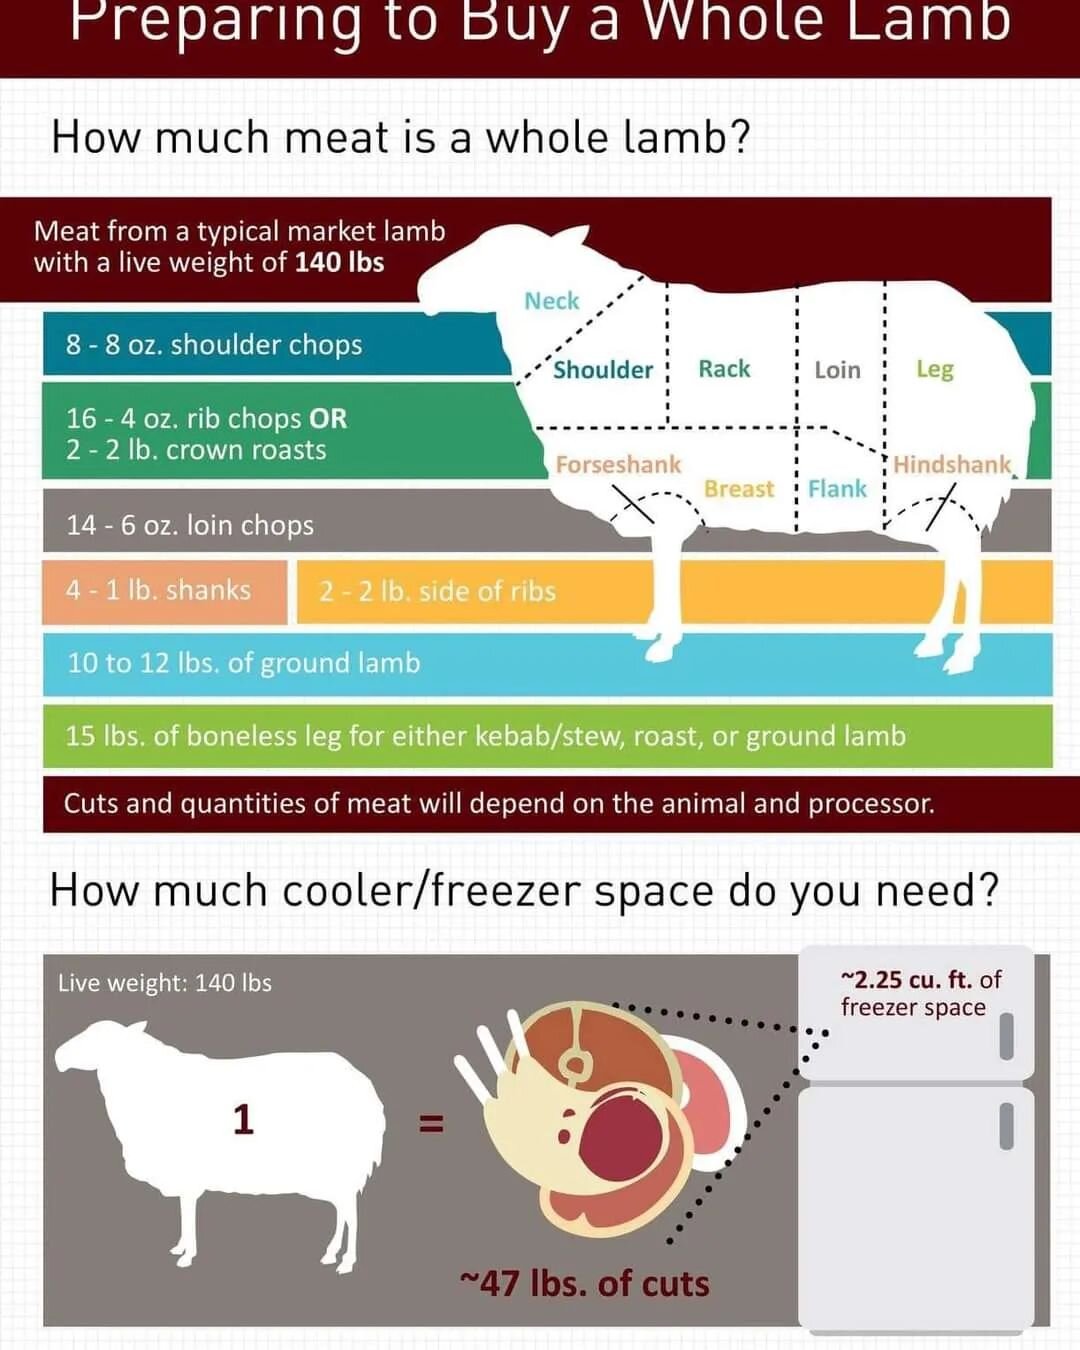 Such great information to have when you're purchasing whole meat animals from your local farmer that they send to the butcher and you pick up. 

I remember the first time I picked up my quarter cow and my half lamb.  I was shocked at how little there